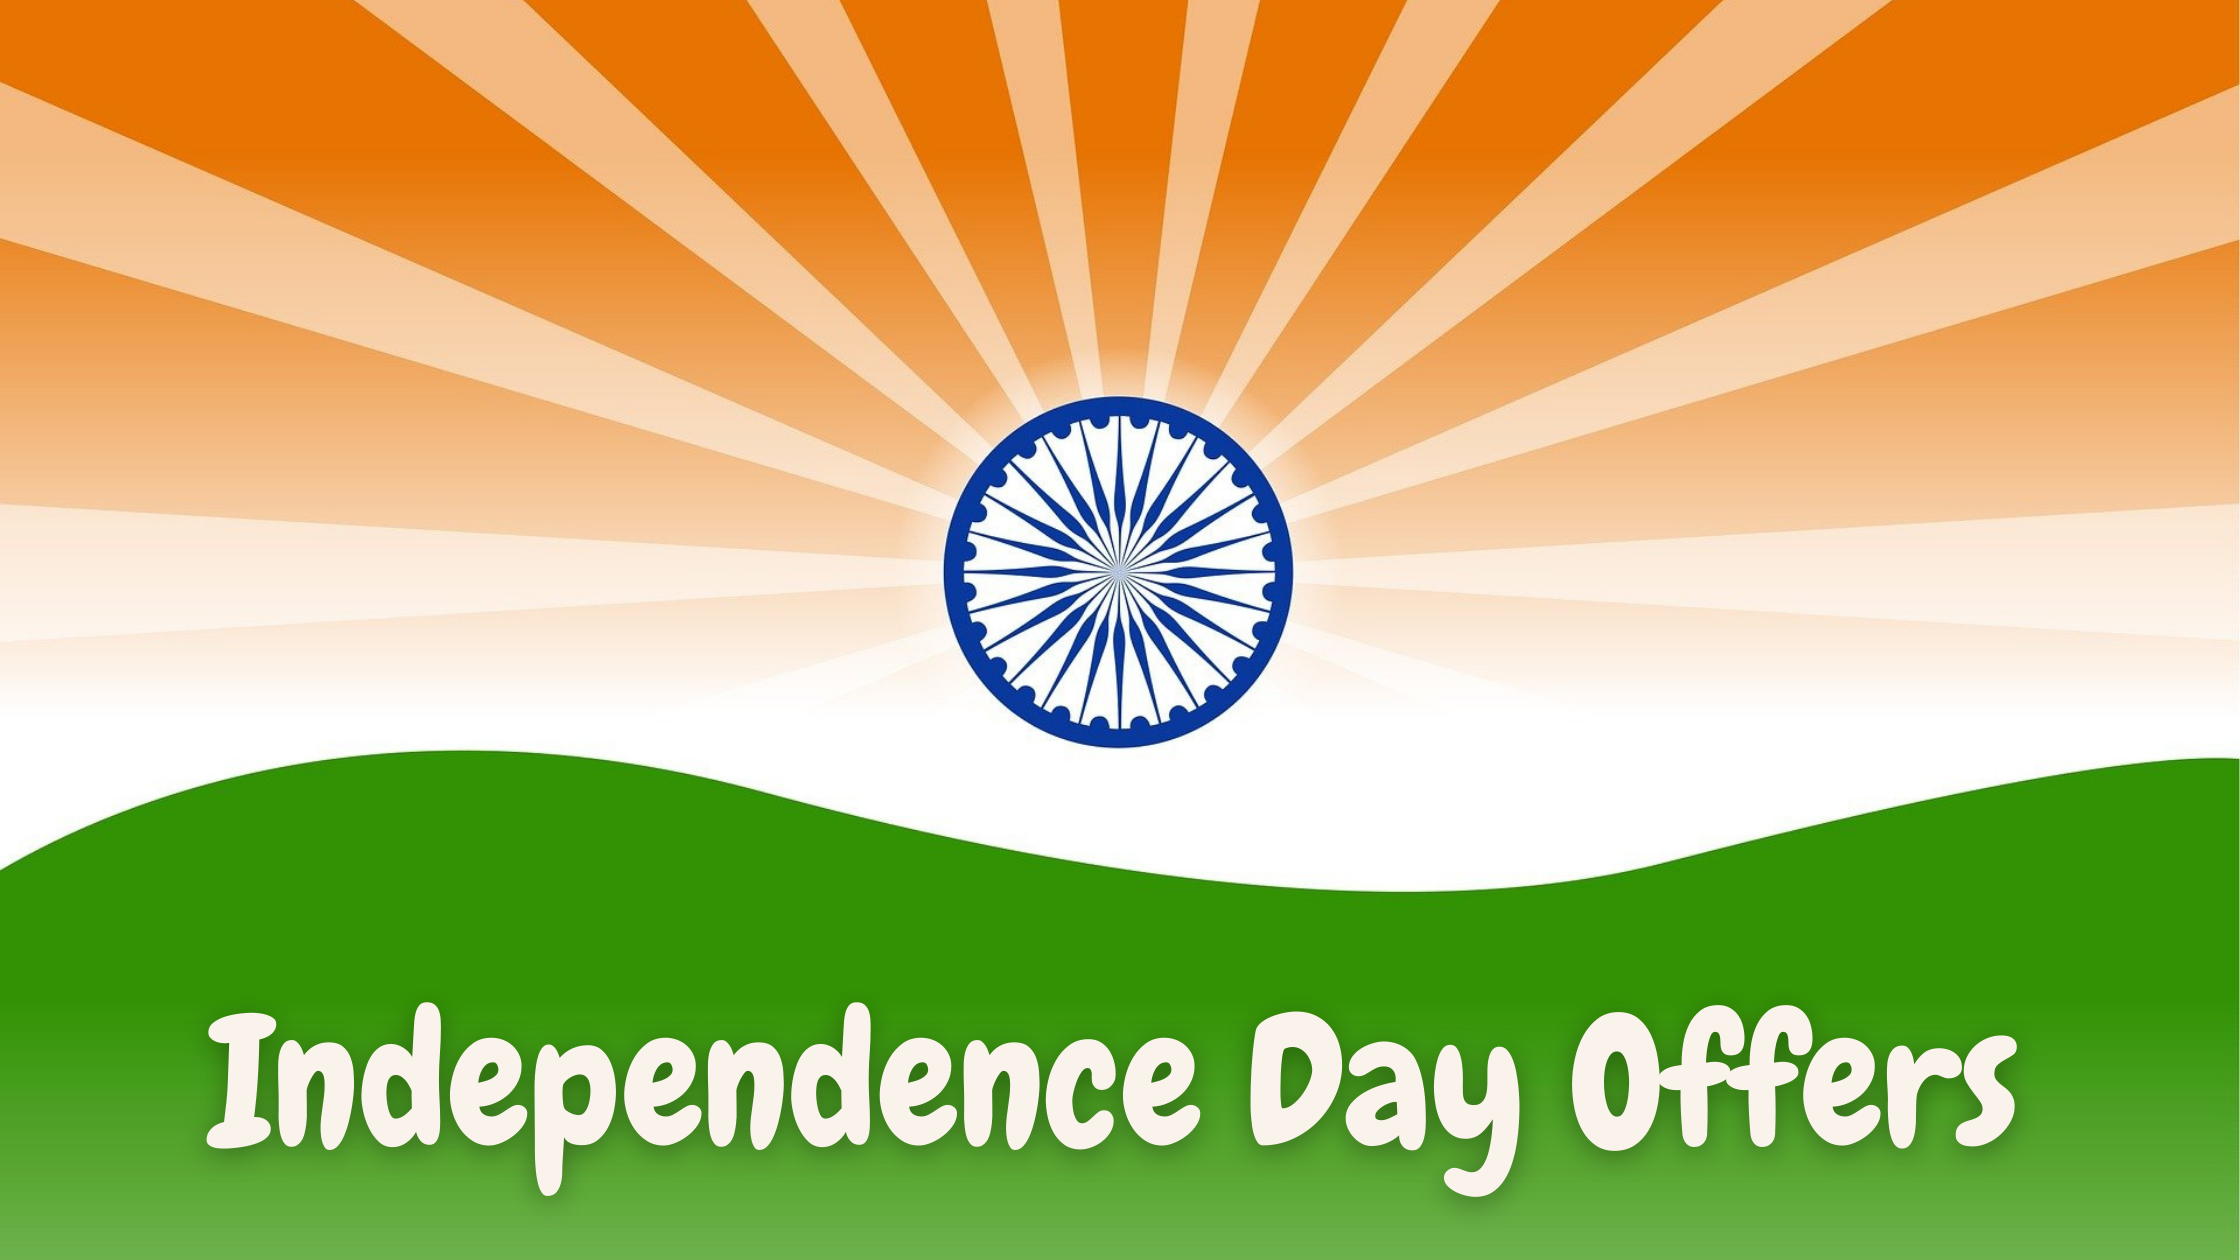 10 Best Independence Day Offers 2021 - Cashbacks, Discounts and More